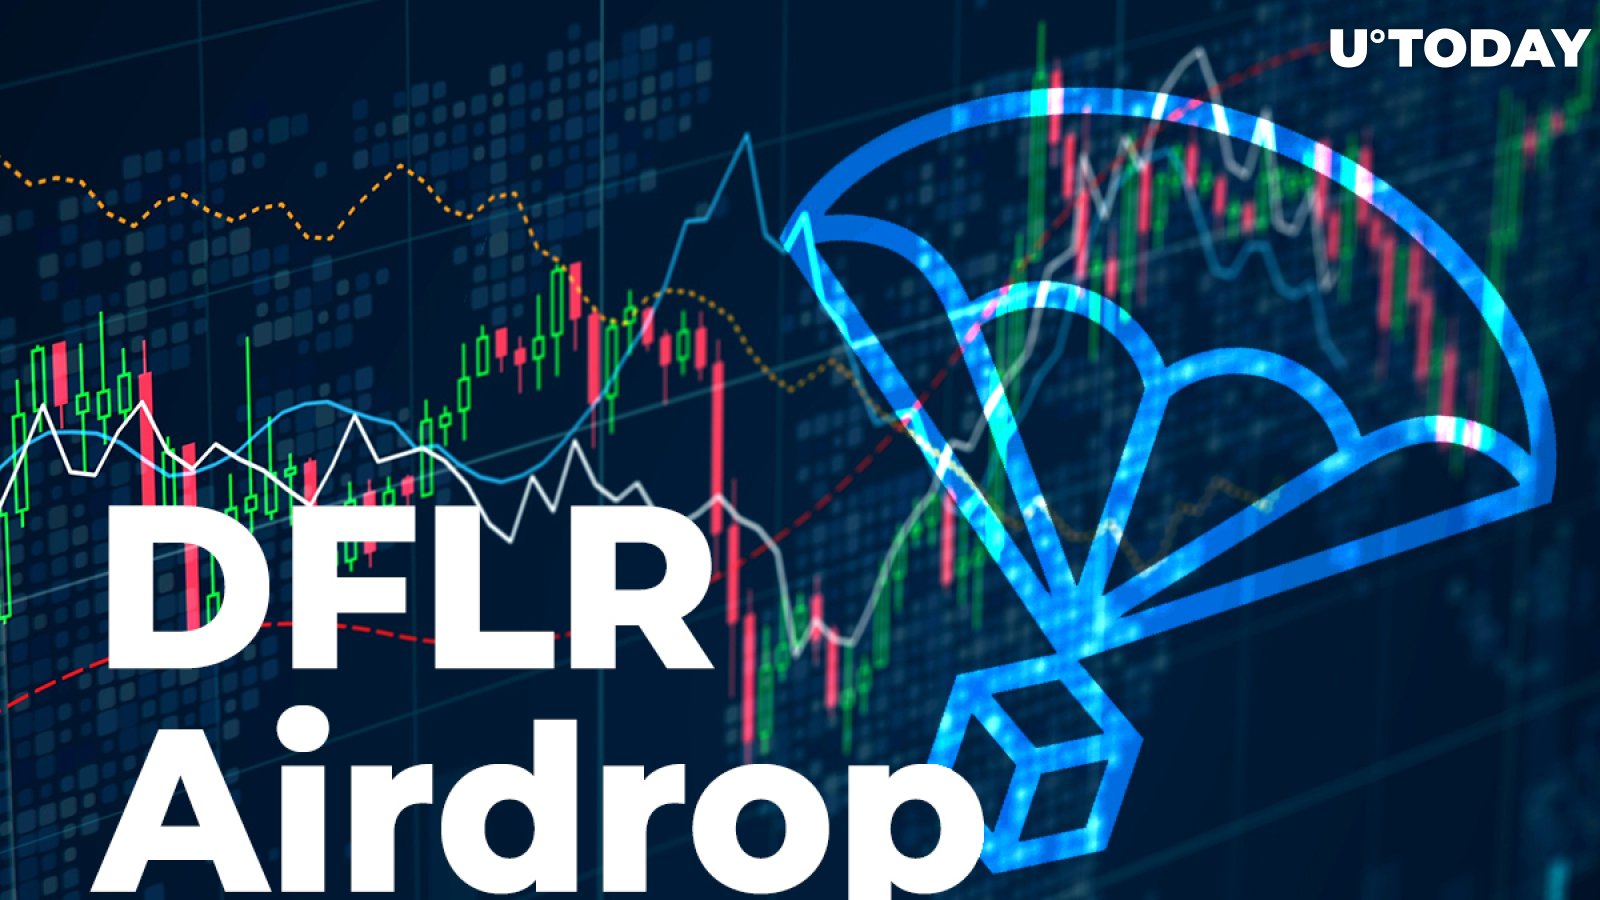 First-Ever Exchange Announces Support of Flare Finance's DFLR Airdrop